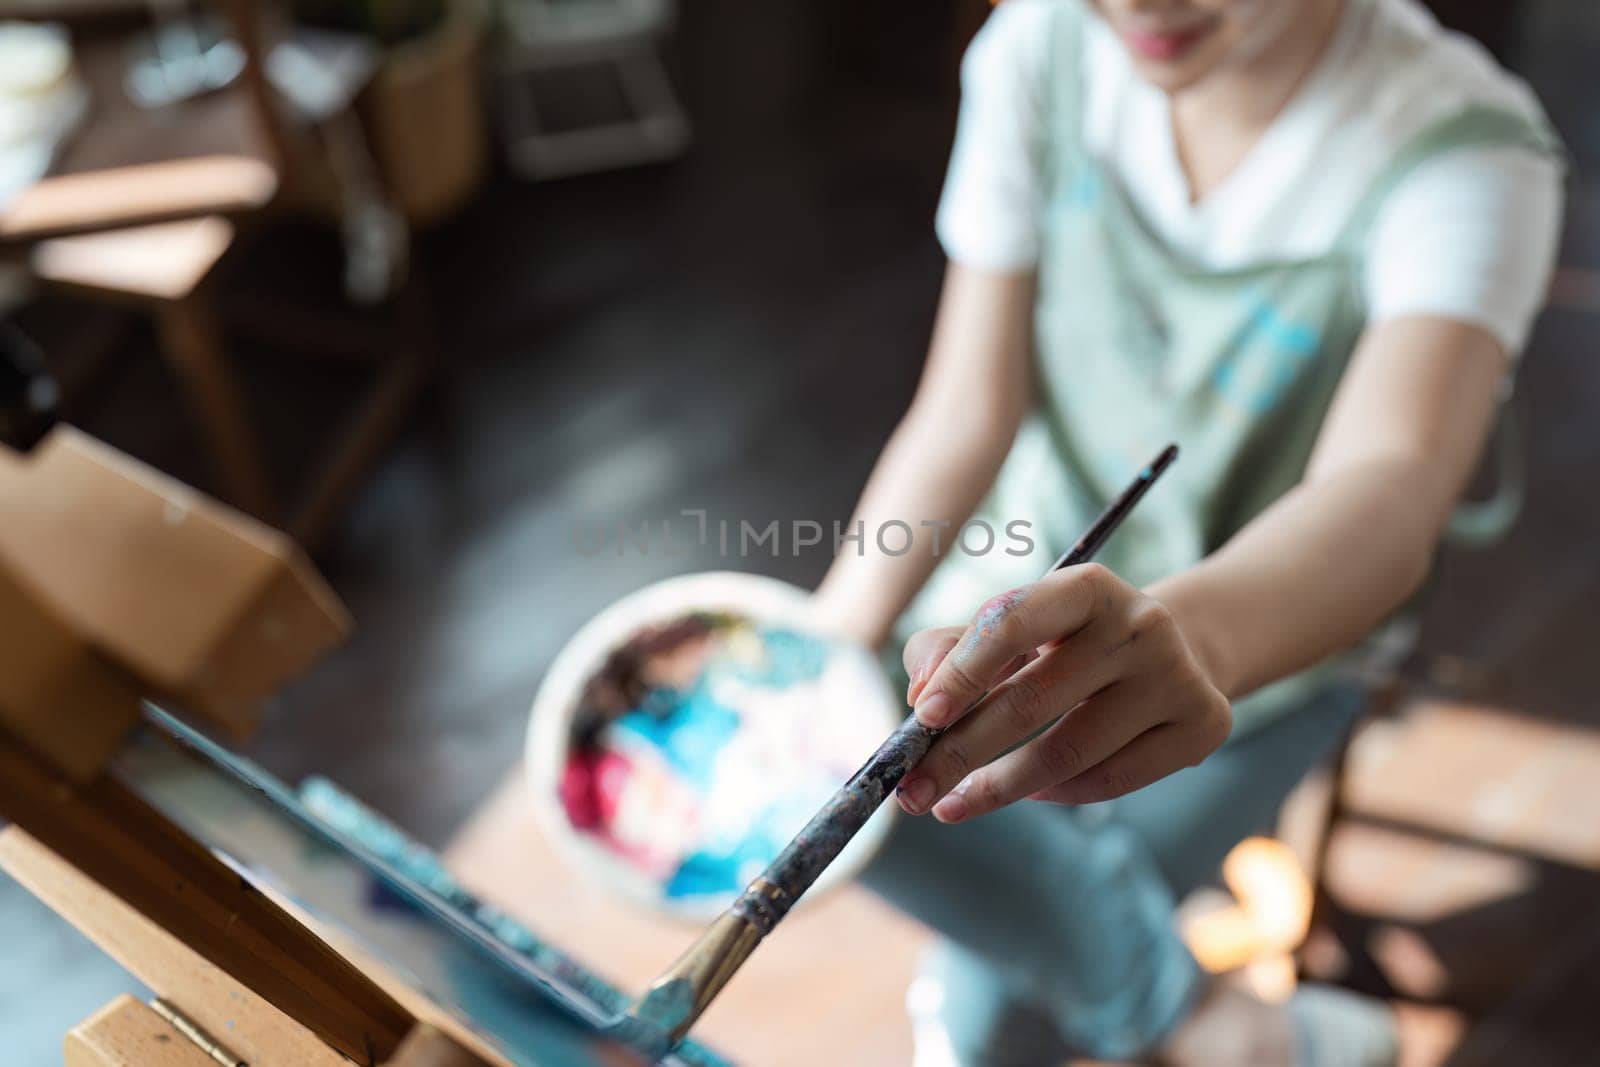 A person painting on a canvas with a brush and palette, showcasing the joy and creativity of engaging in a hobby in a home studio.